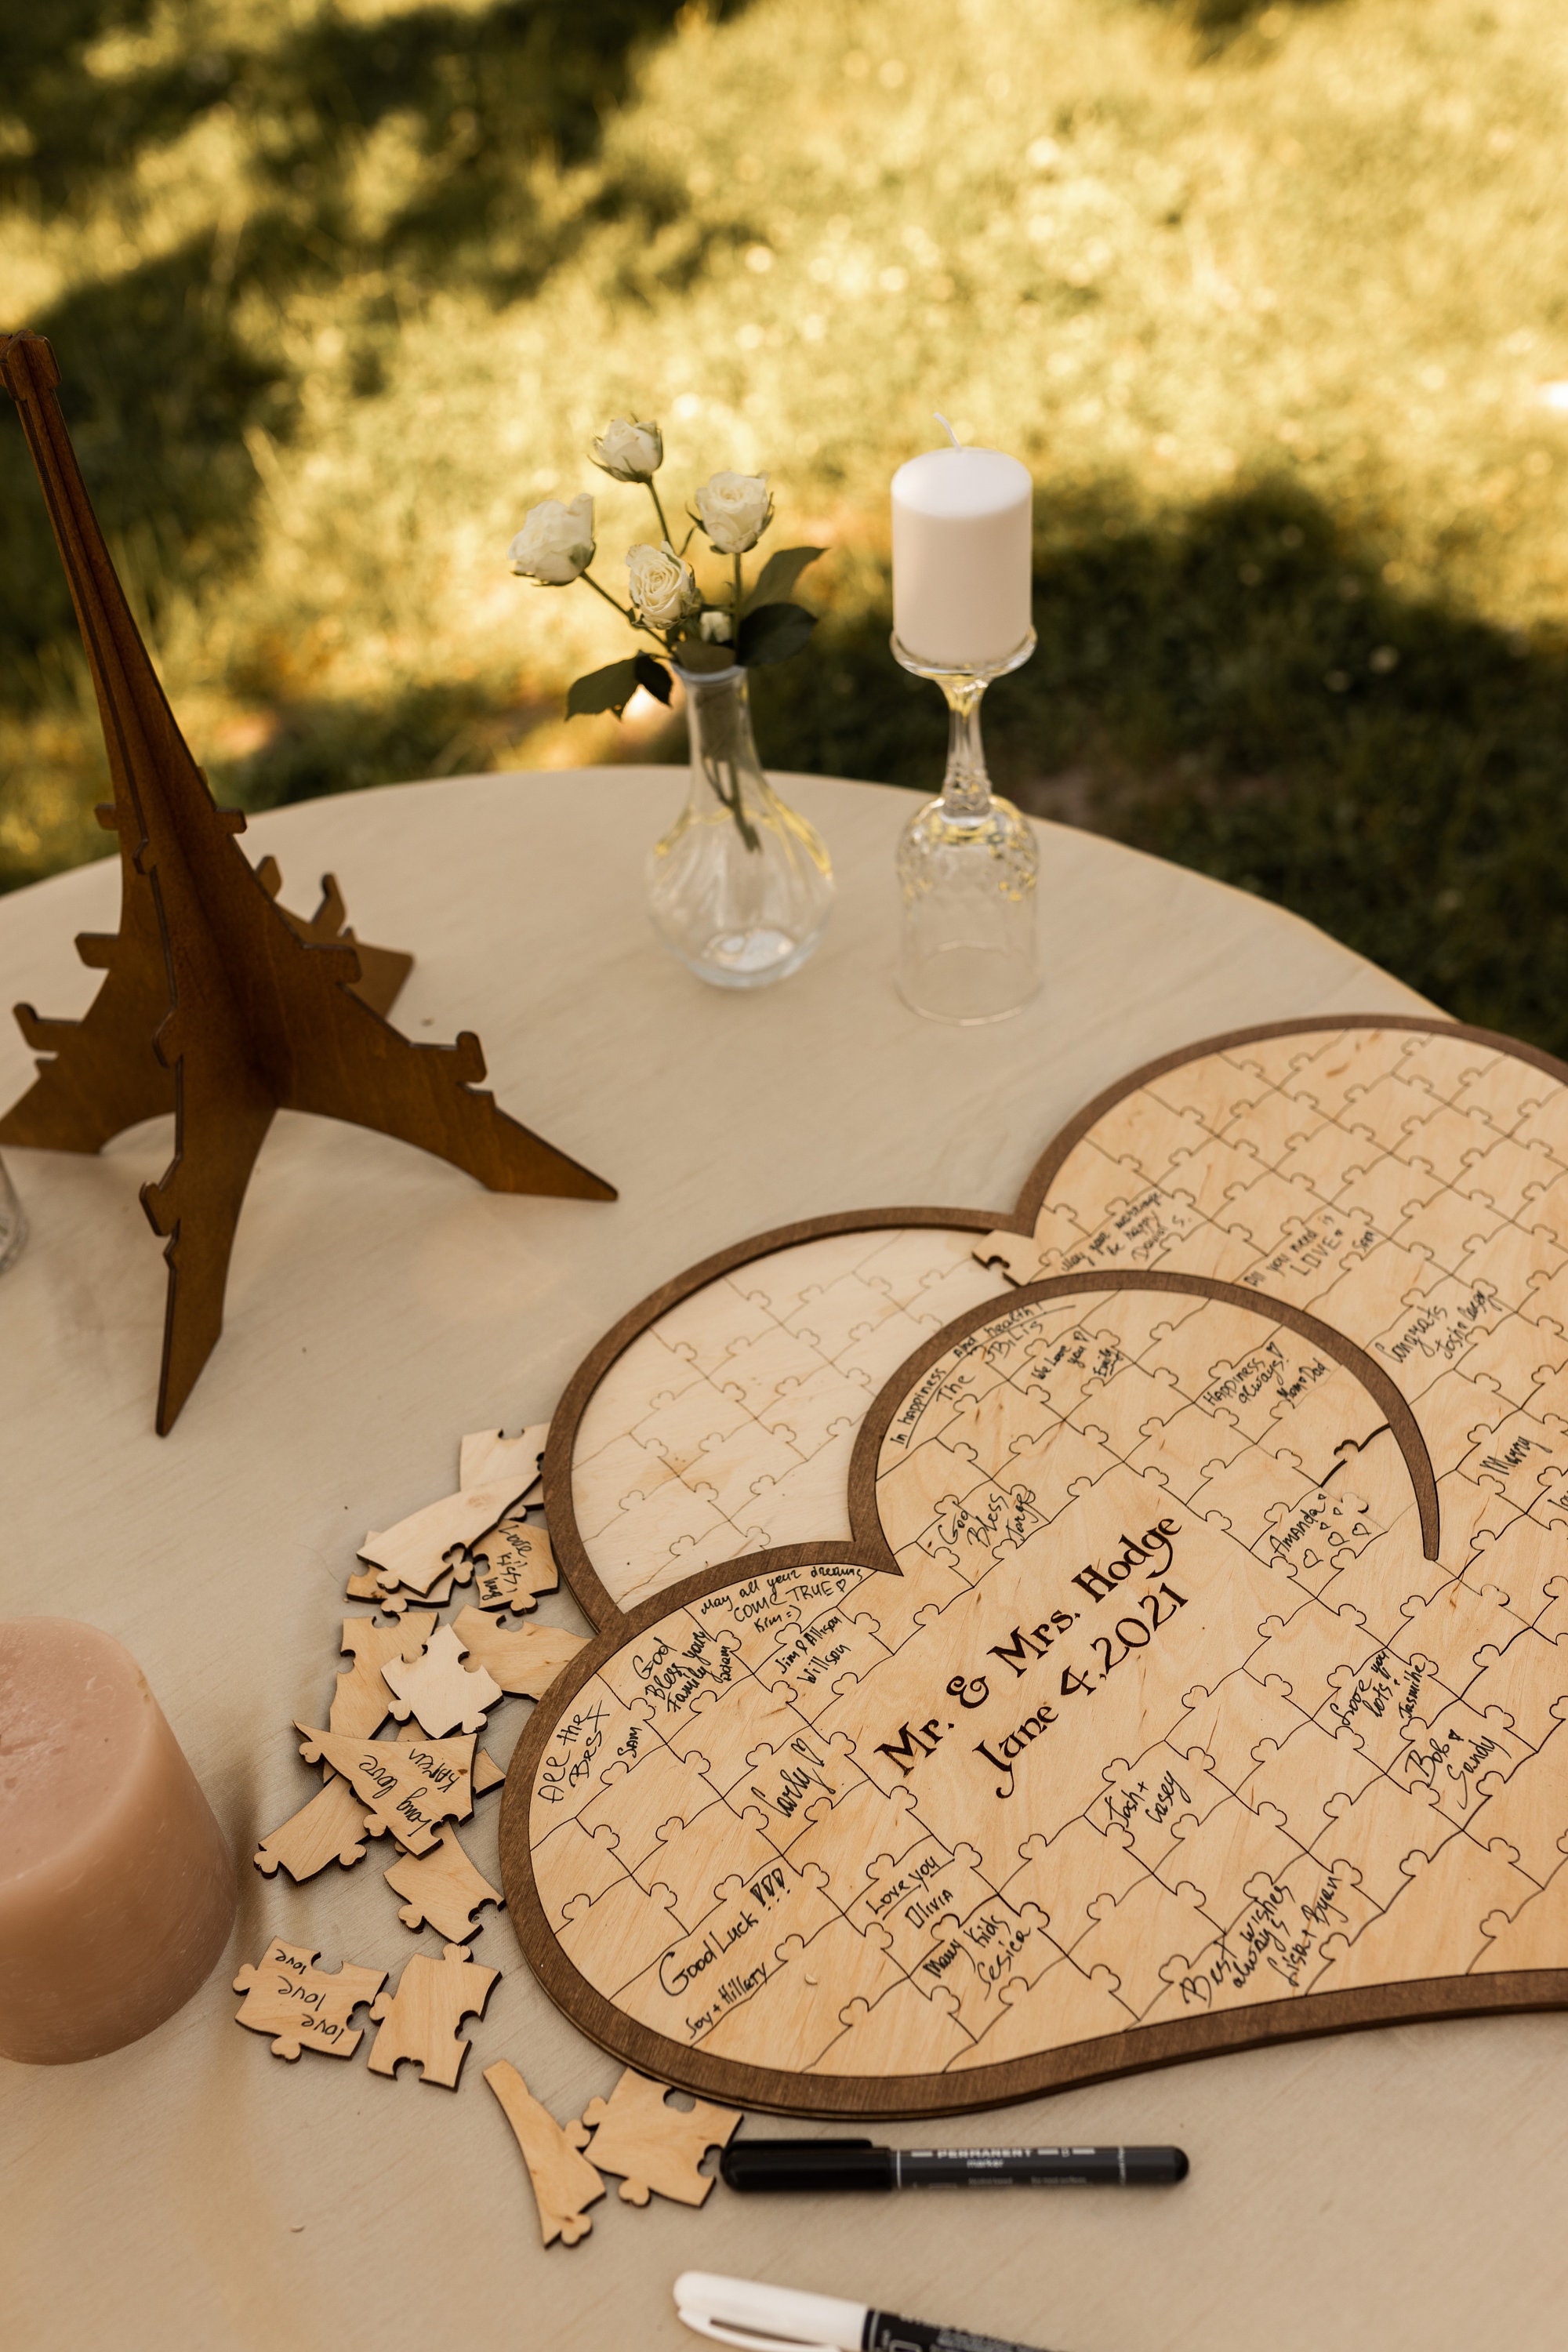 Hearts wedding guest book alternative Wedding puzzle guest book Newlyweds gift for couples Wedding anniversary gift for parents